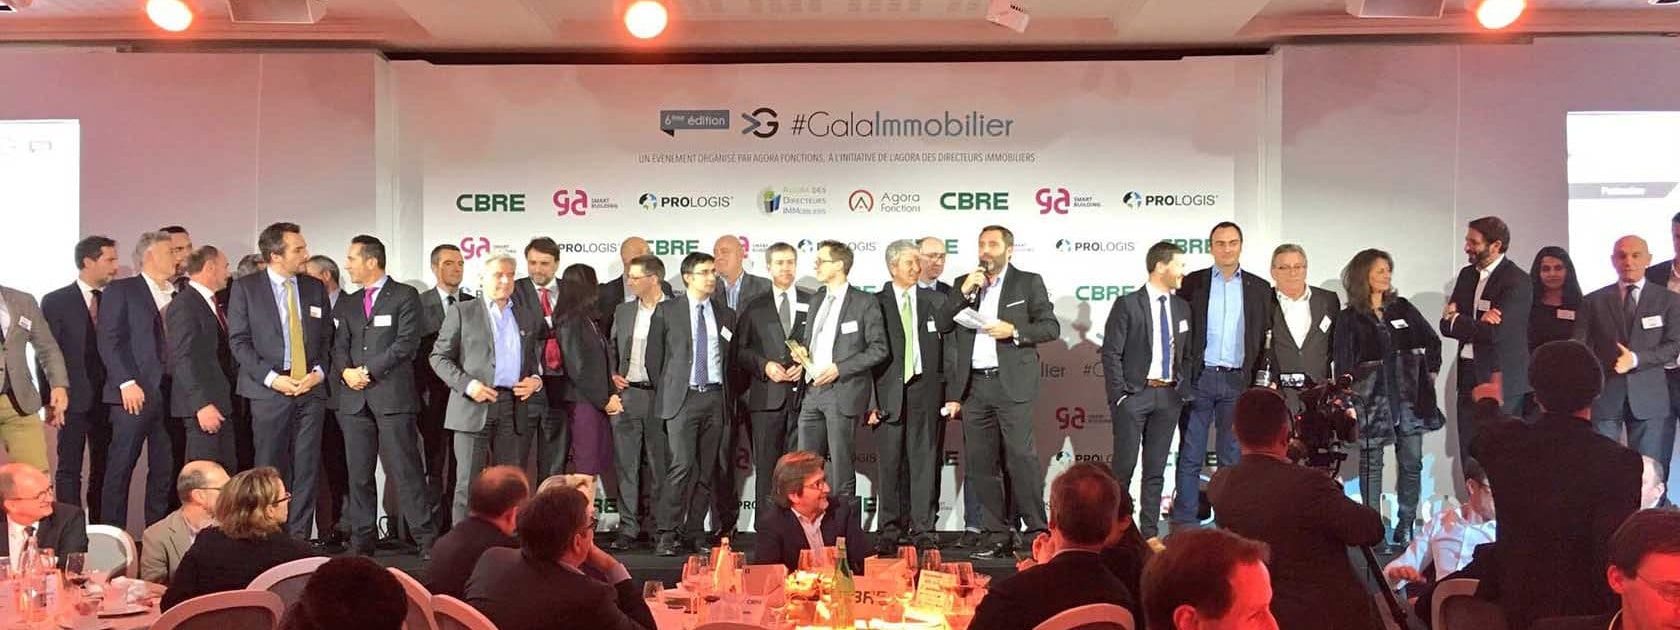 GalaImmobilier 2018